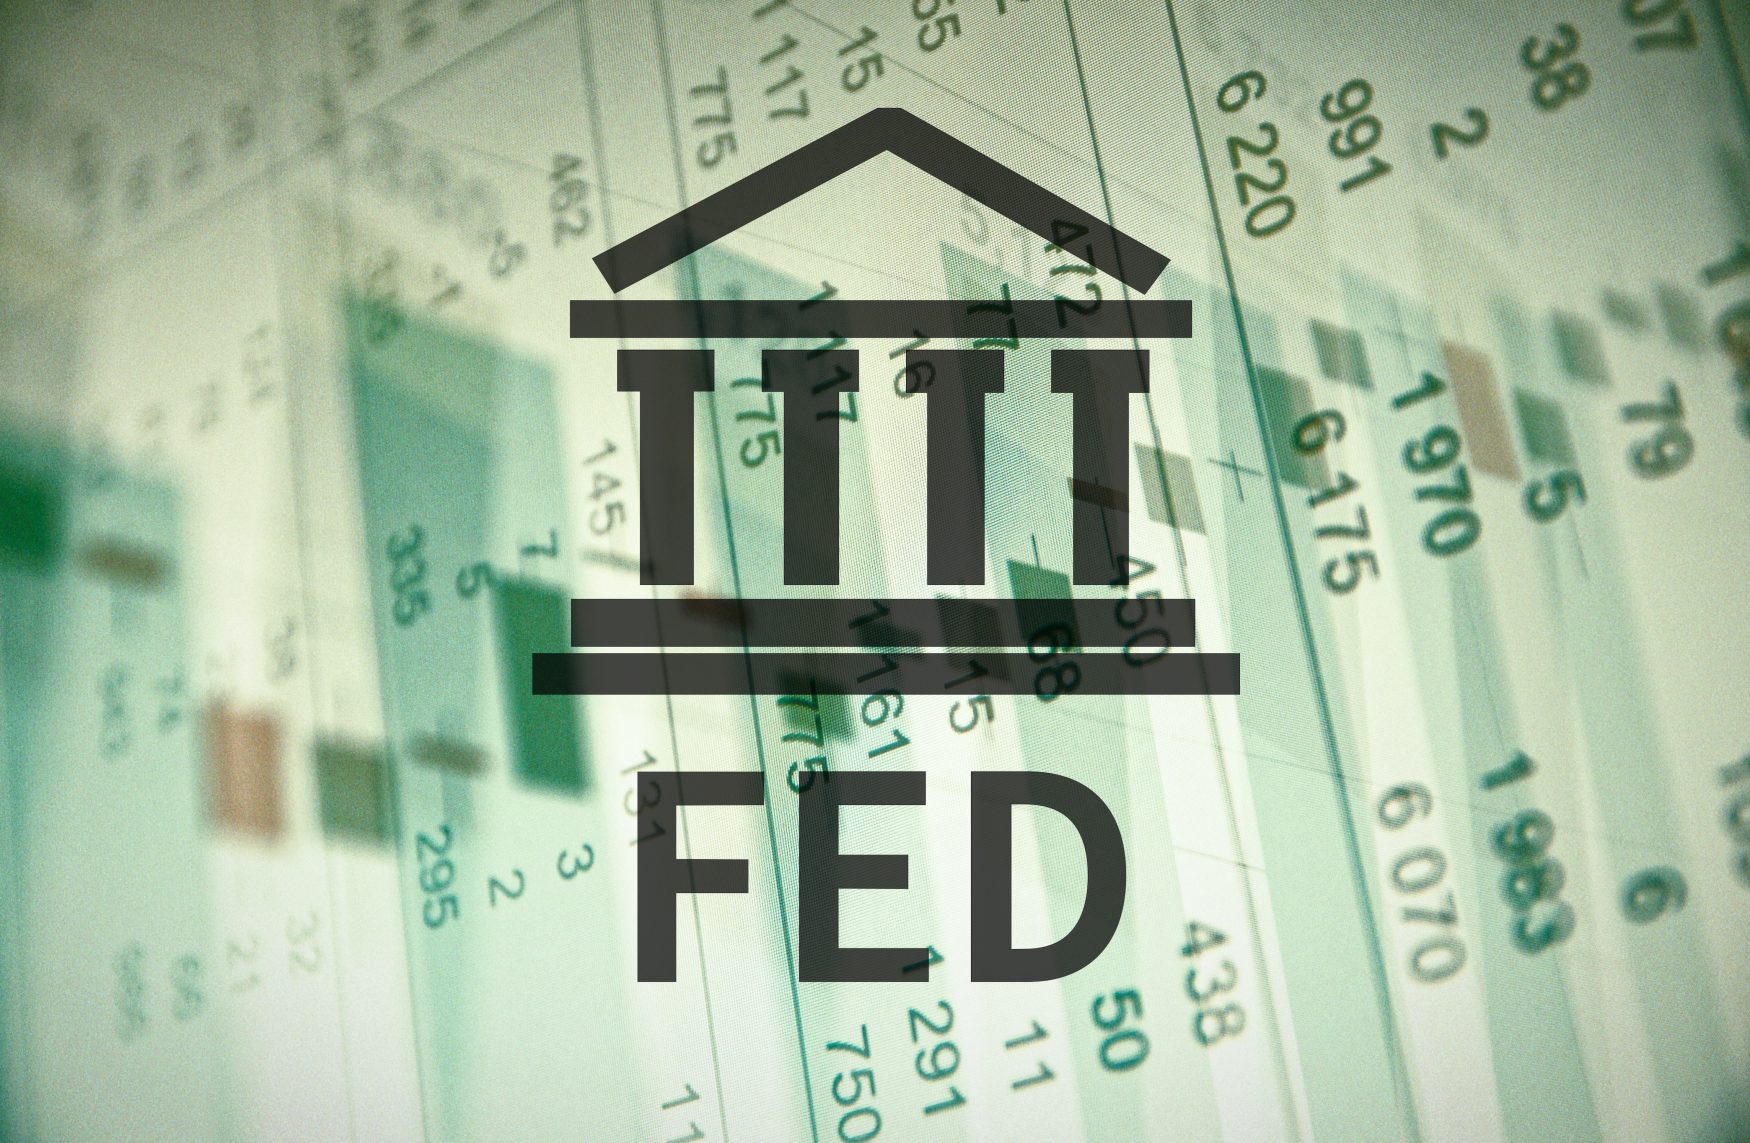 Facts About the Federal Reserve